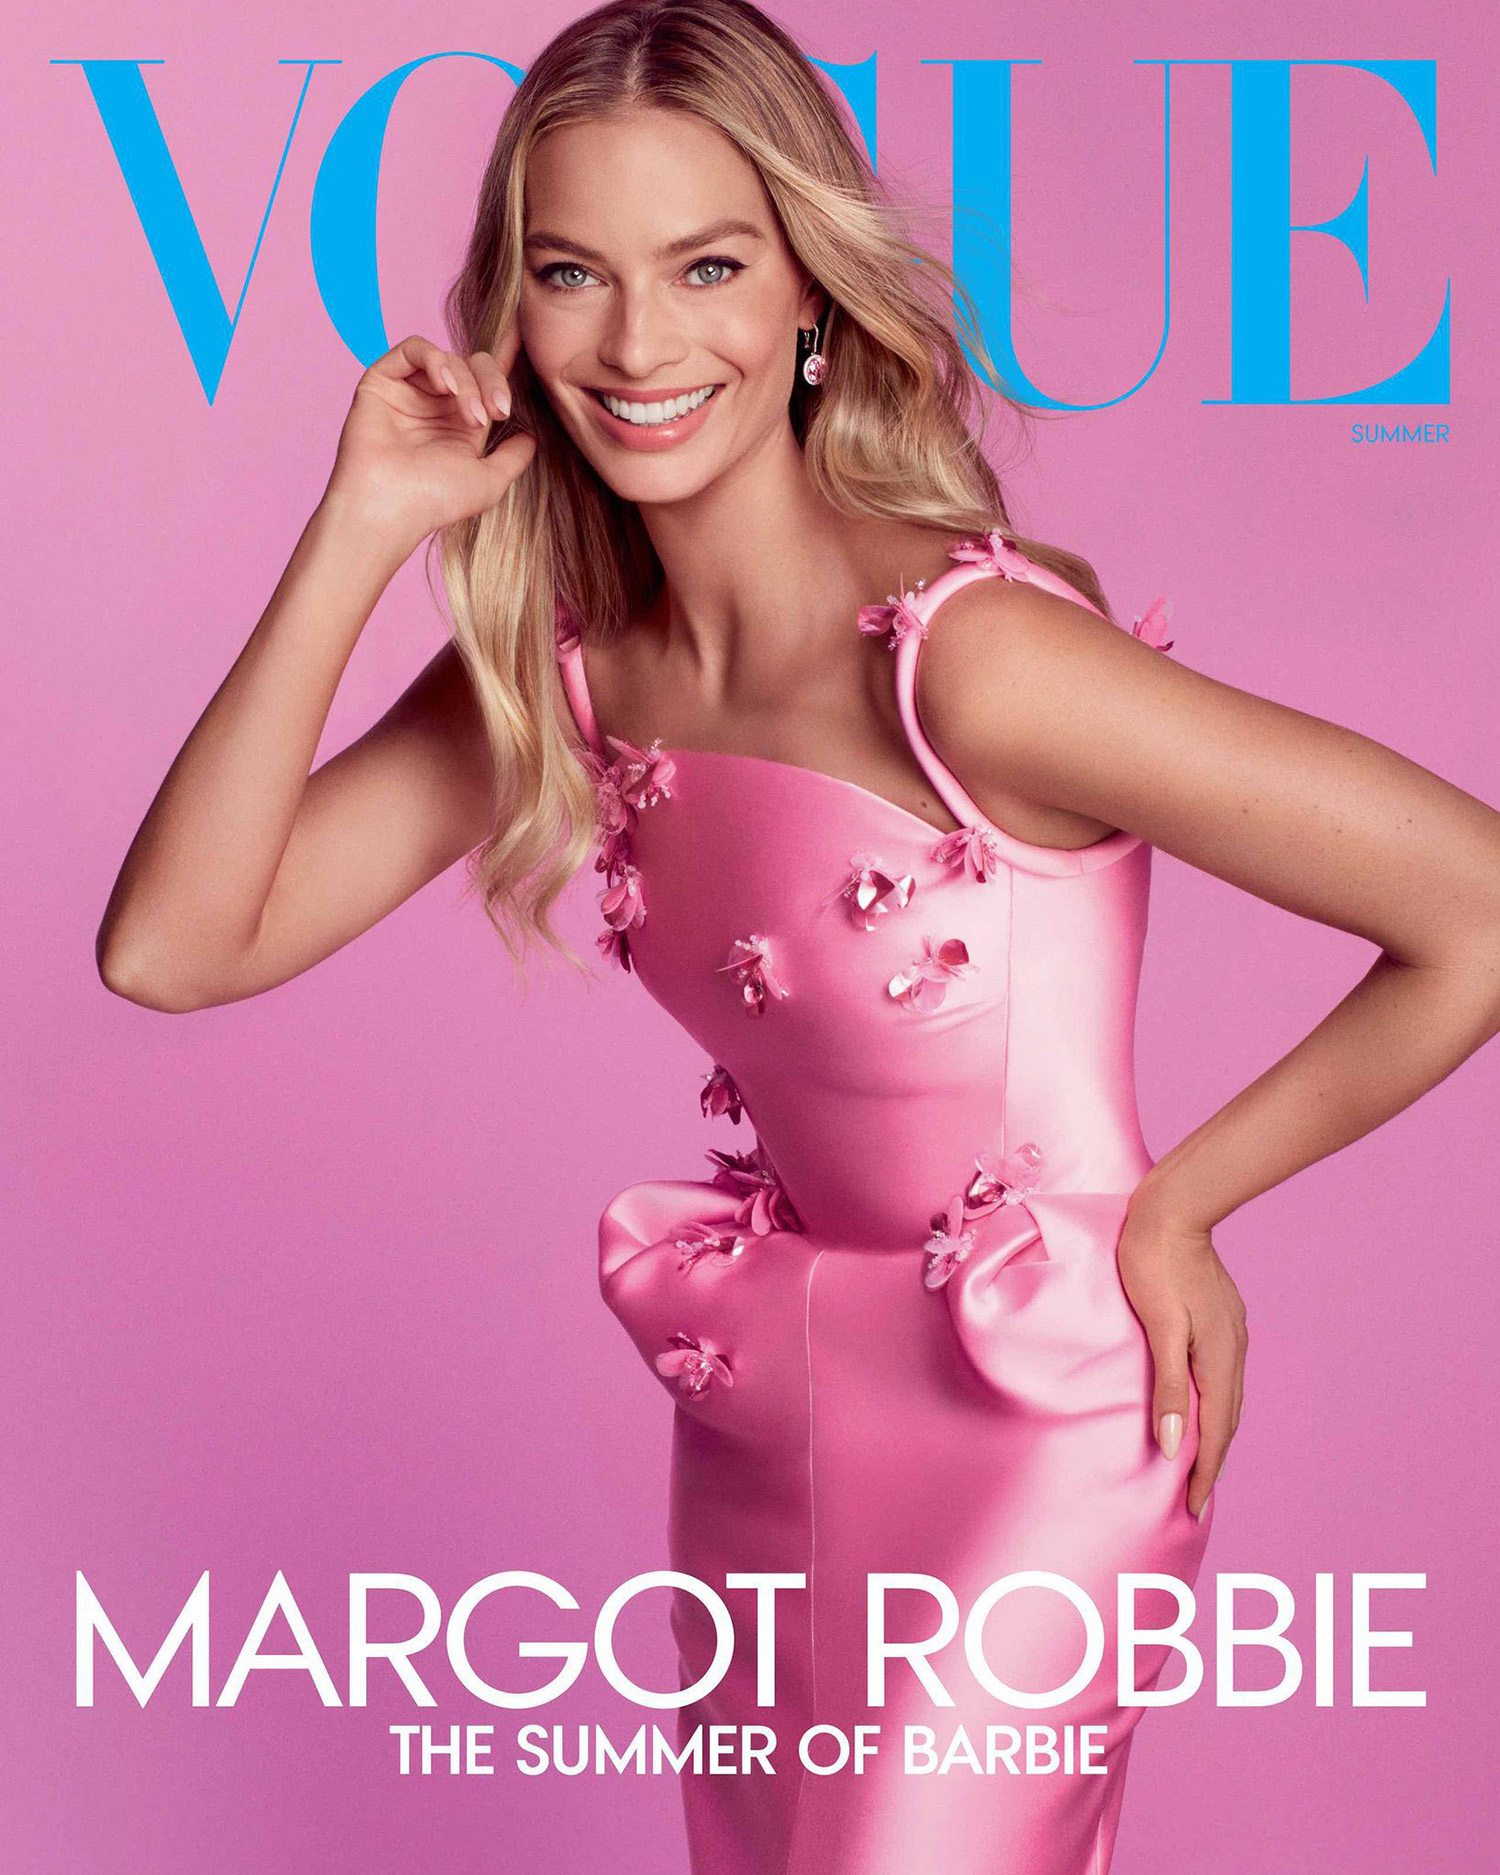 Margot Robbie covers Vogue US Summer 2023 by Ethan James Green